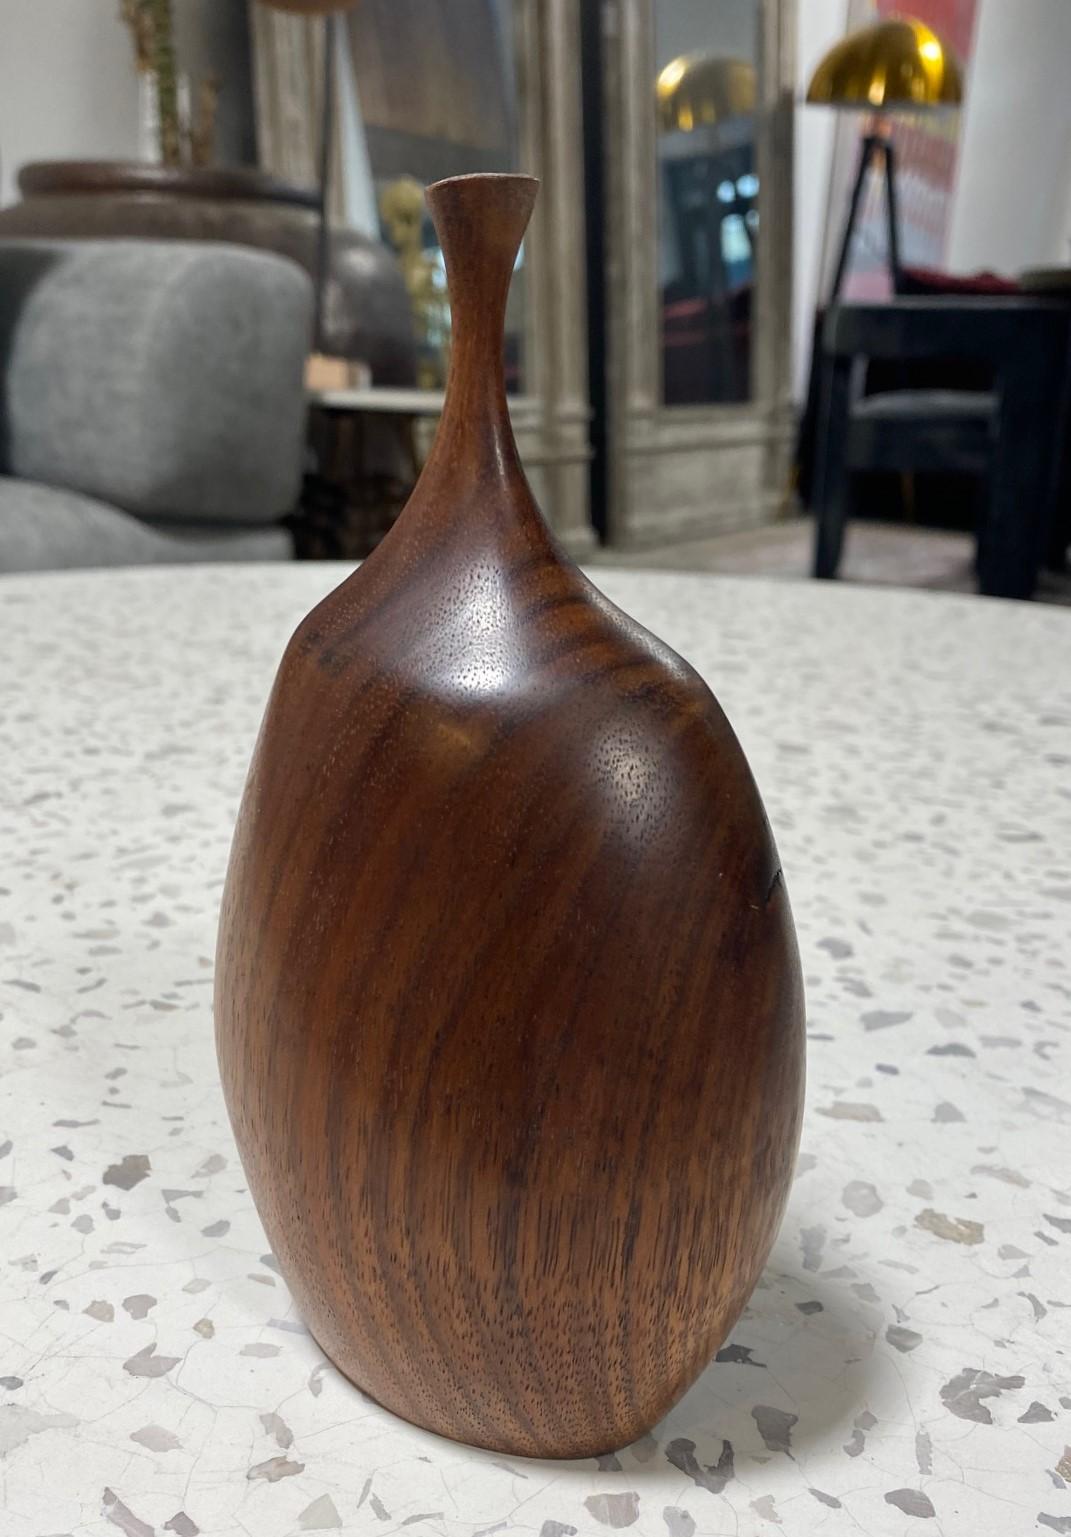 Doug Ayers Signed California Artist Organic Natural Wood Turned Weed Vase Vessel In Good Condition For Sale In Studio City, CA